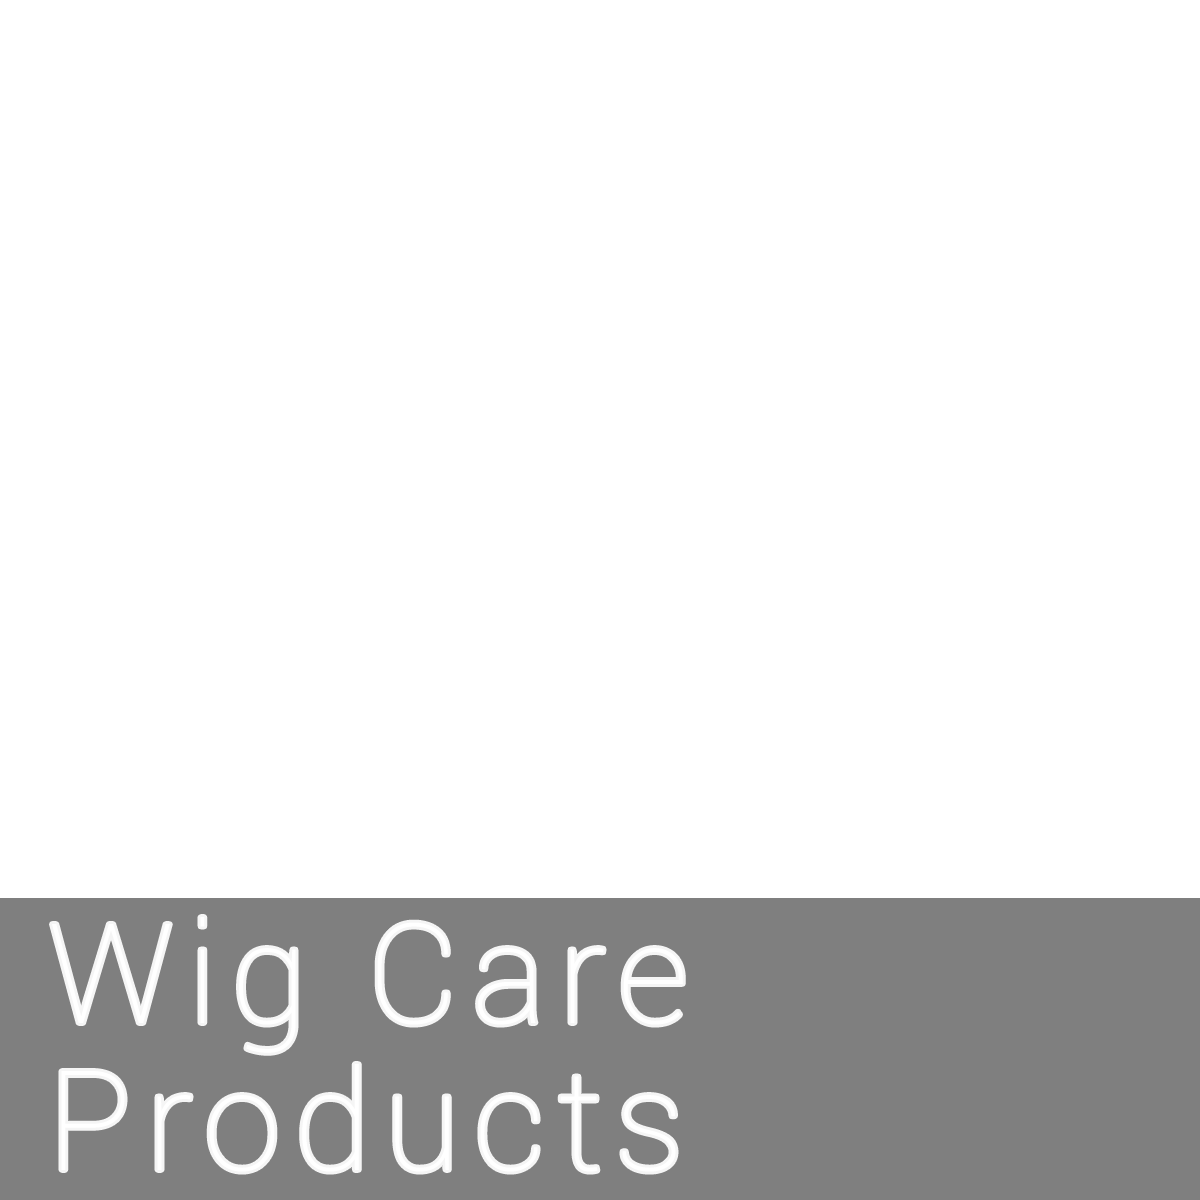 voga-wigs-and-hair-add-ons-products-page-box-link-wig-care-products